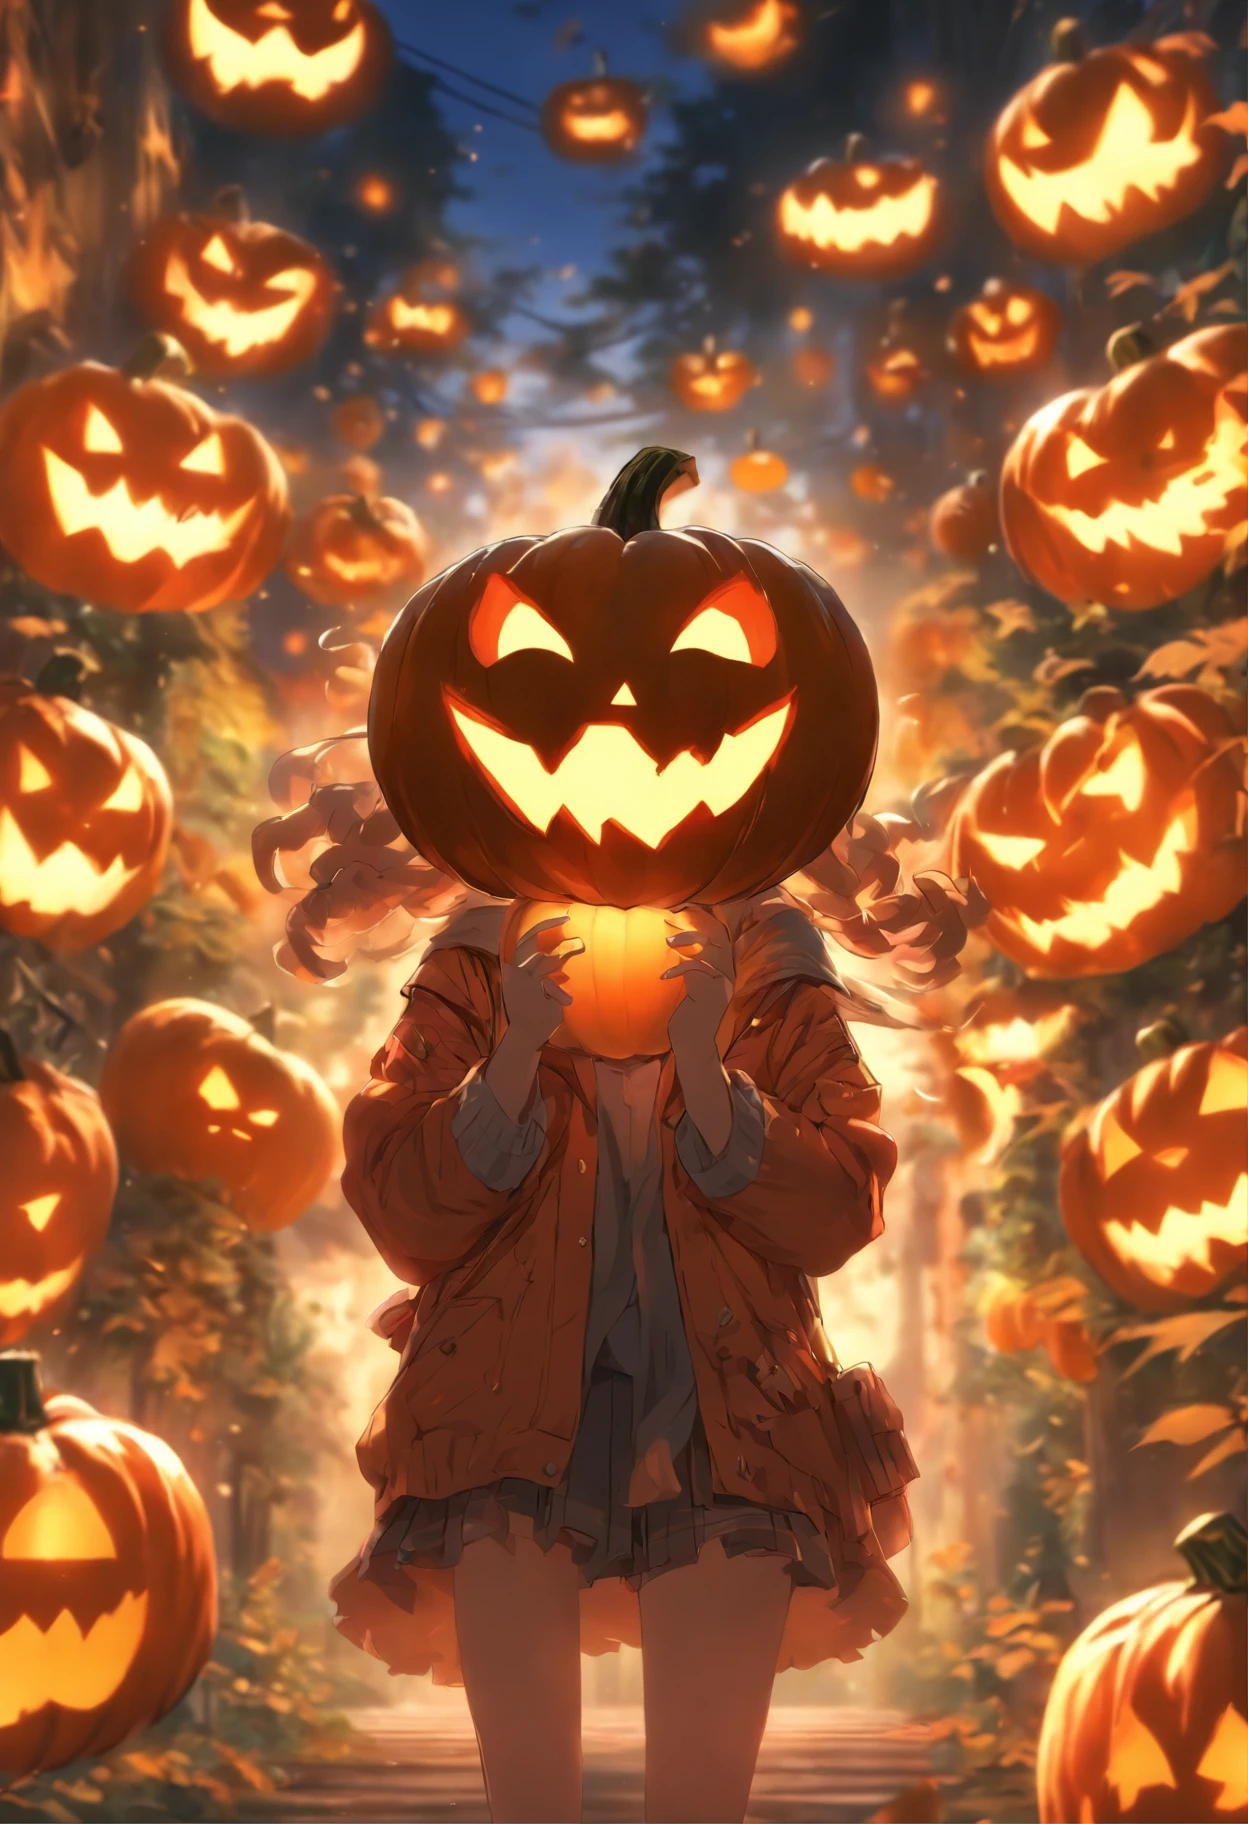 a girl holding a pumpkin in front of her face, anime art wallpaper 8 k,  anime art wallpaper 4 k, anime art wallpaper 4k, anime style 4 k - SeaArt AI